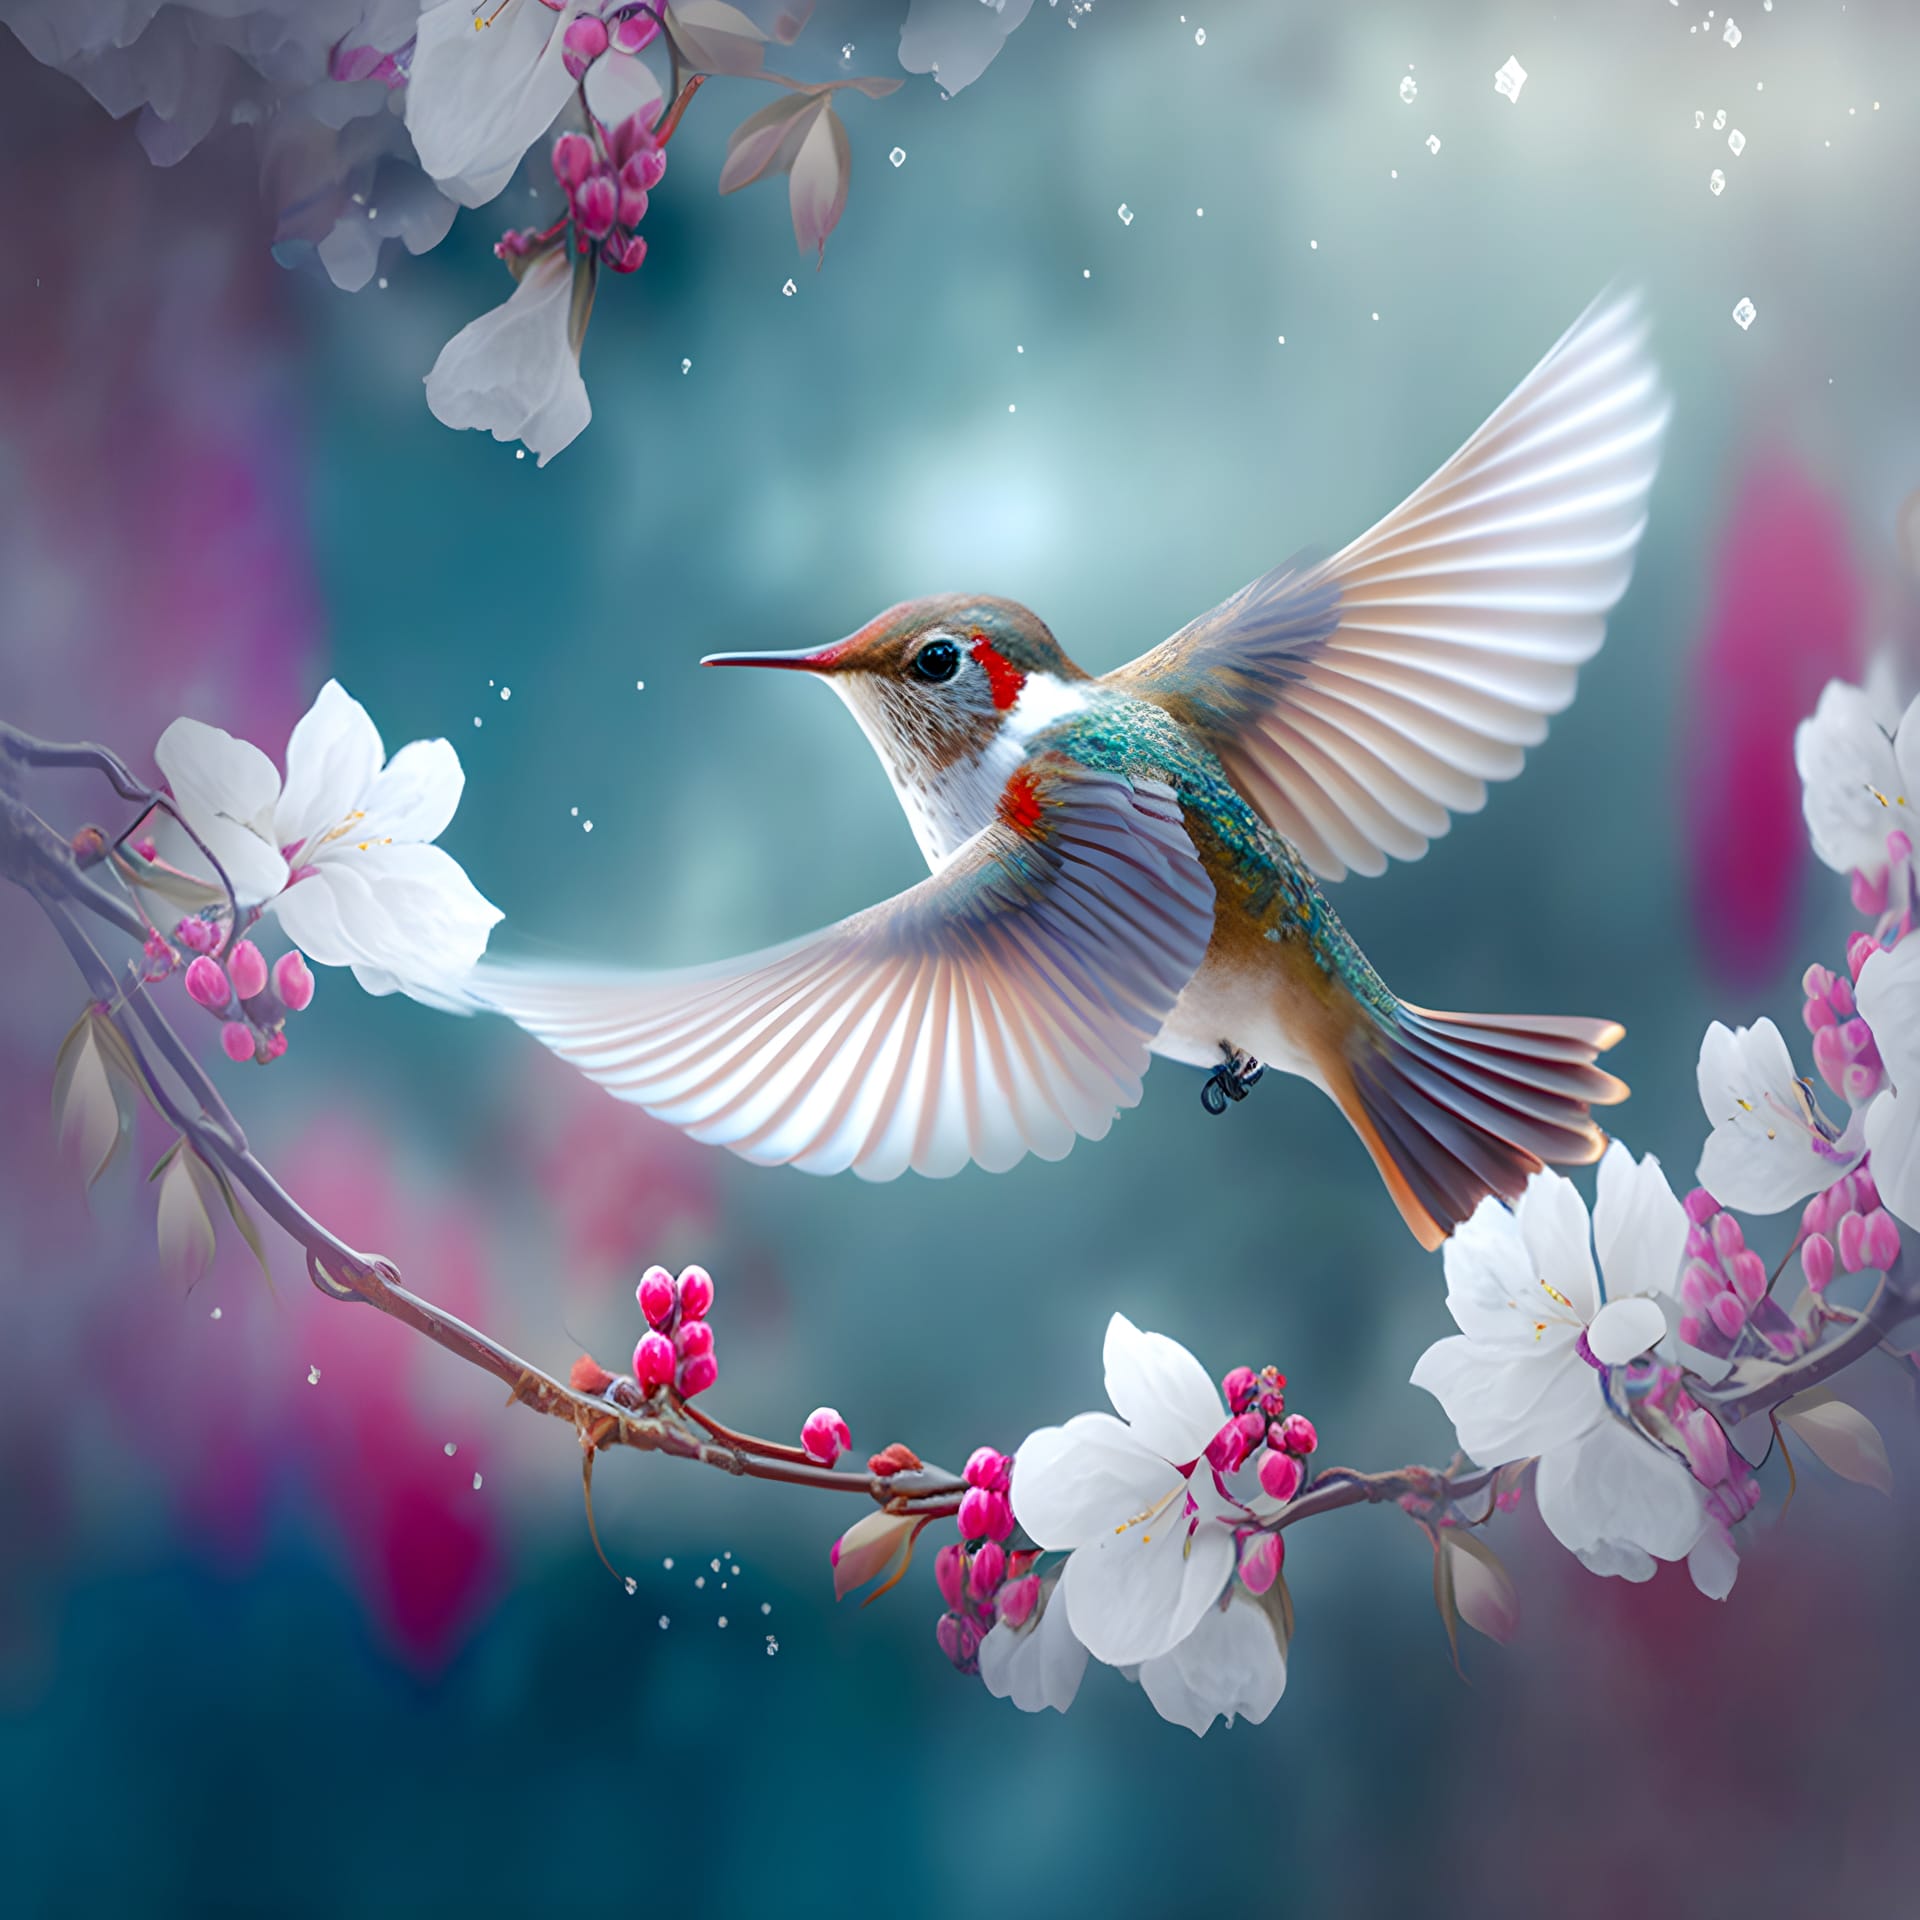 Hummingbird hovering branch gentle mistyr white red cherry blossom image